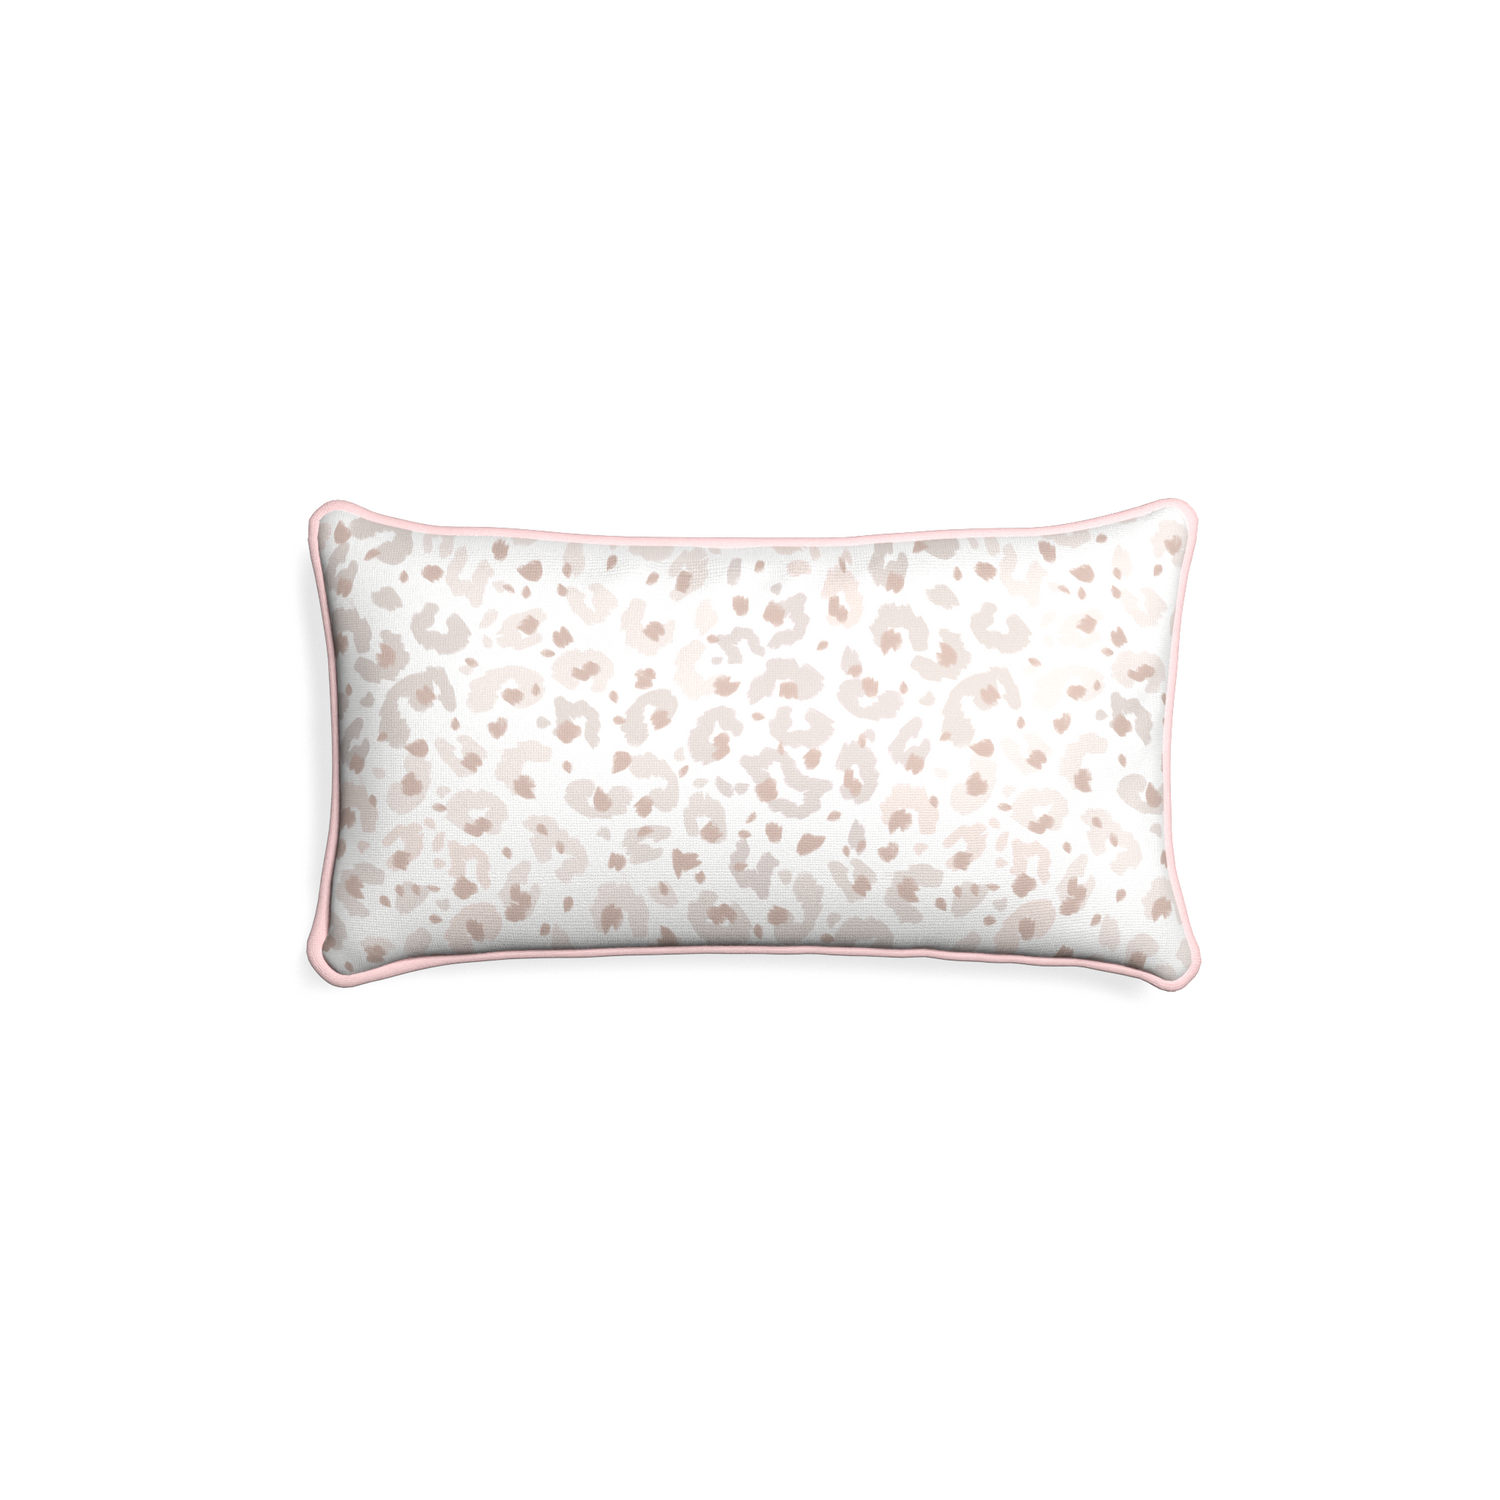 Petite-lumbar rosie custom beige animal printpillow with petal piping on white background